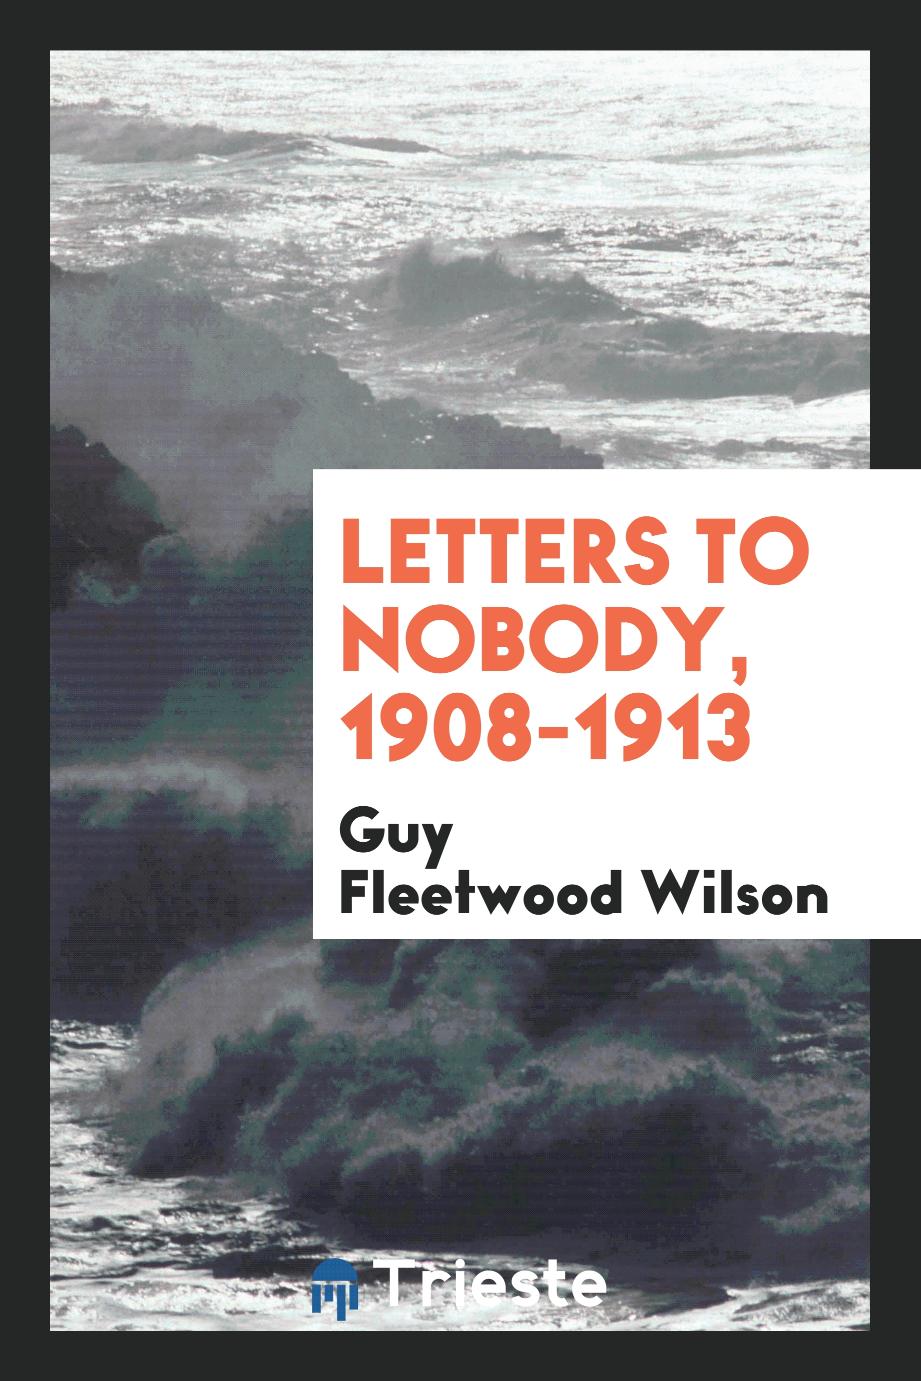 Letters to nobody, 1908-1913